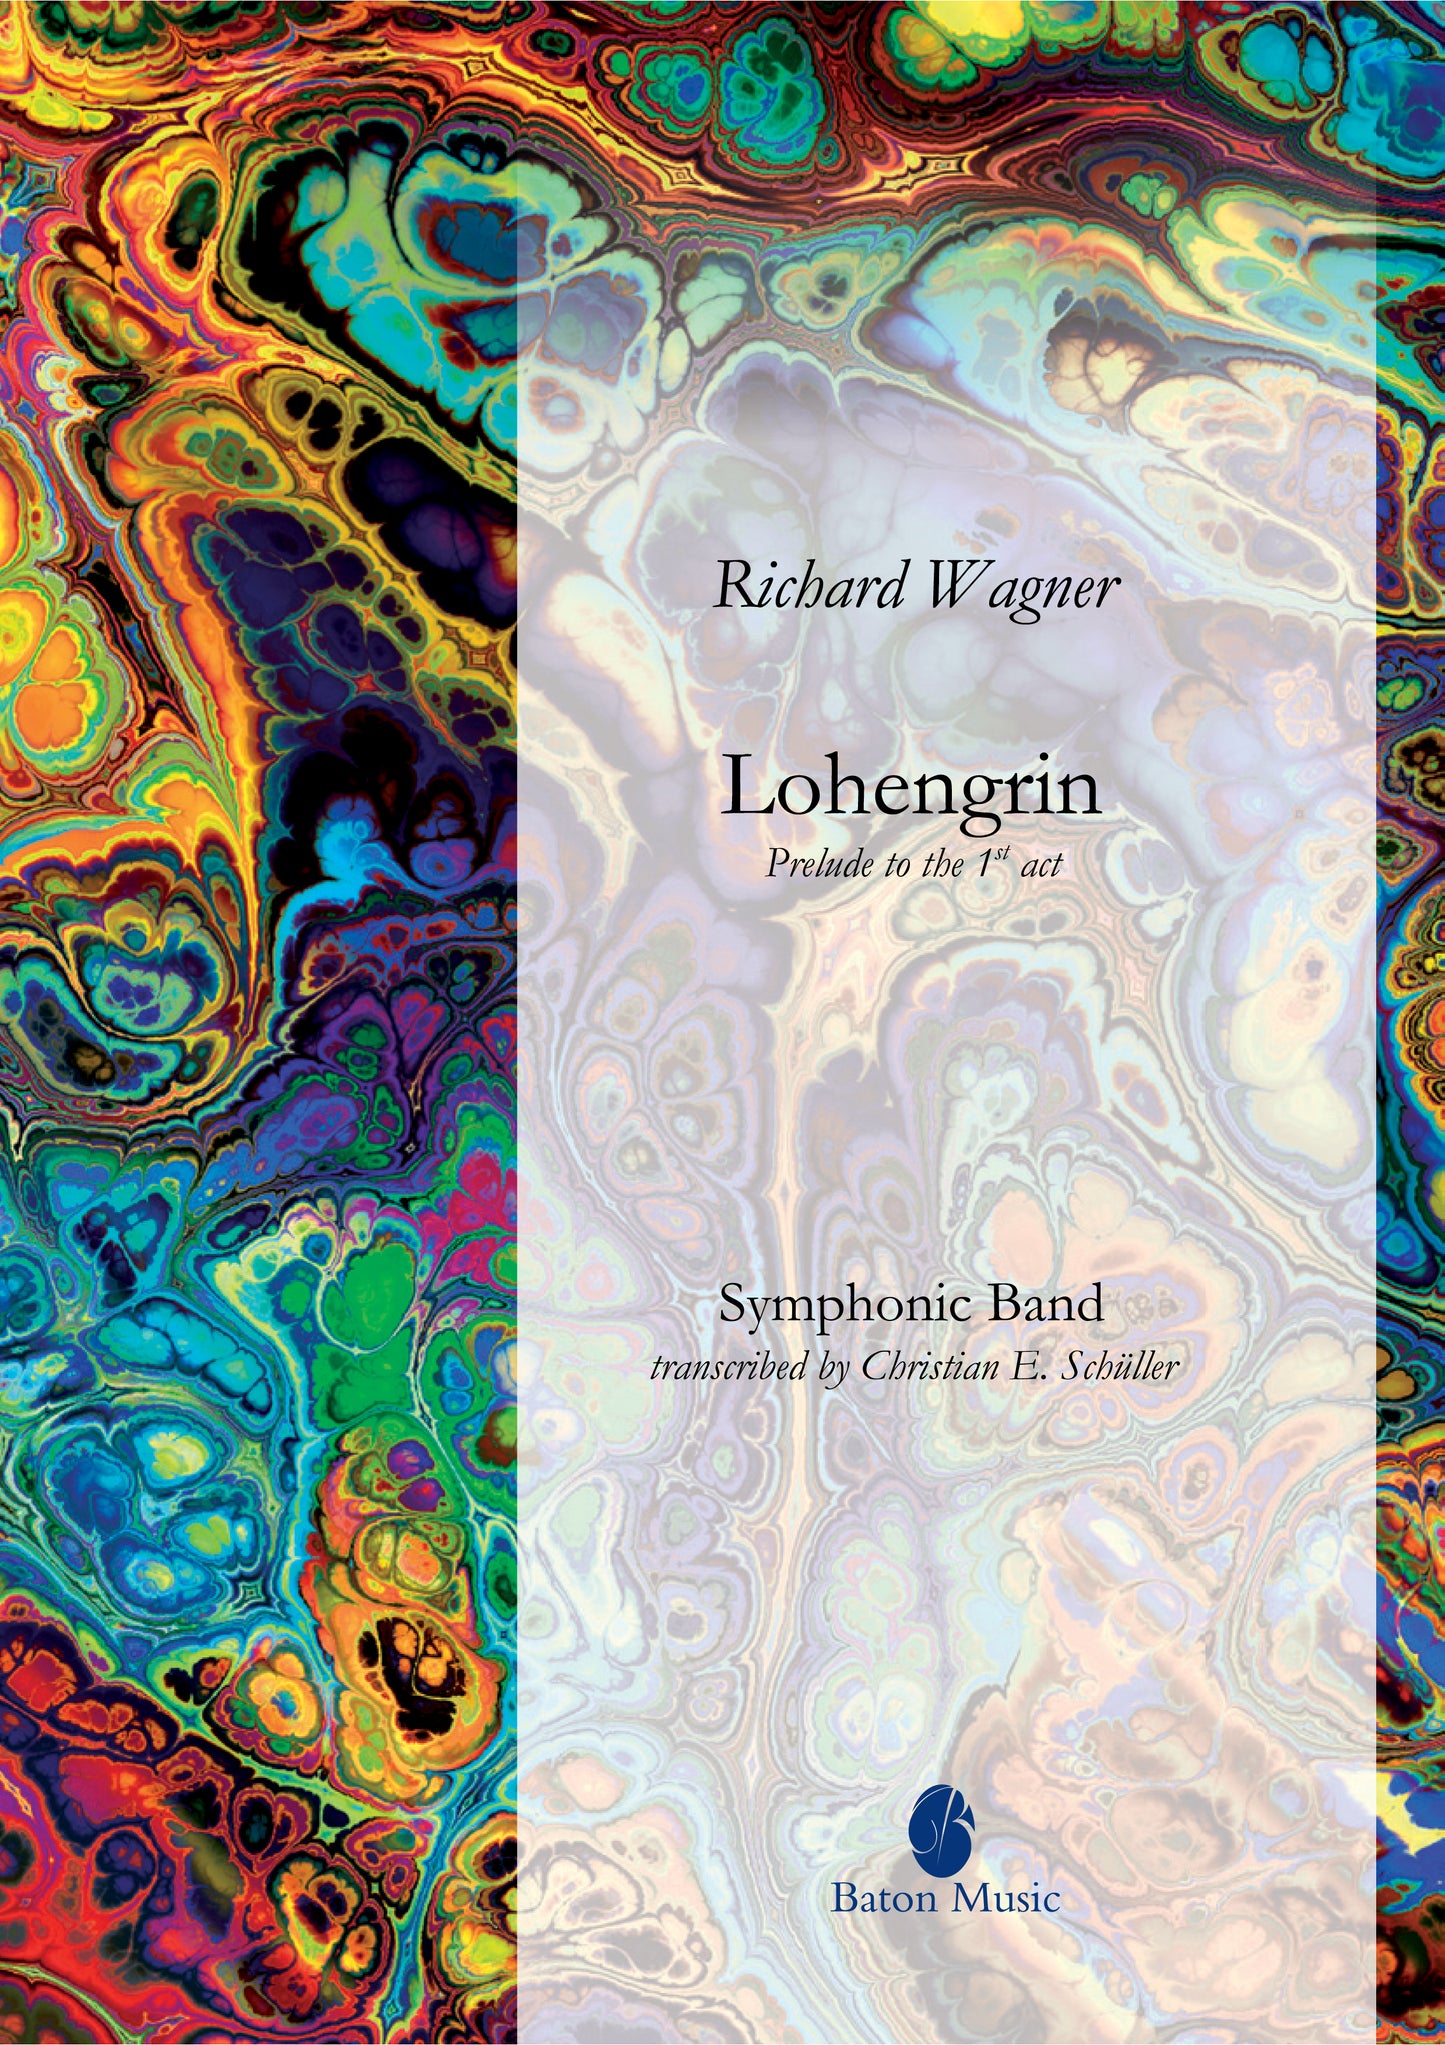 Lohengrin (Prelude to Act I) - R. Wagner